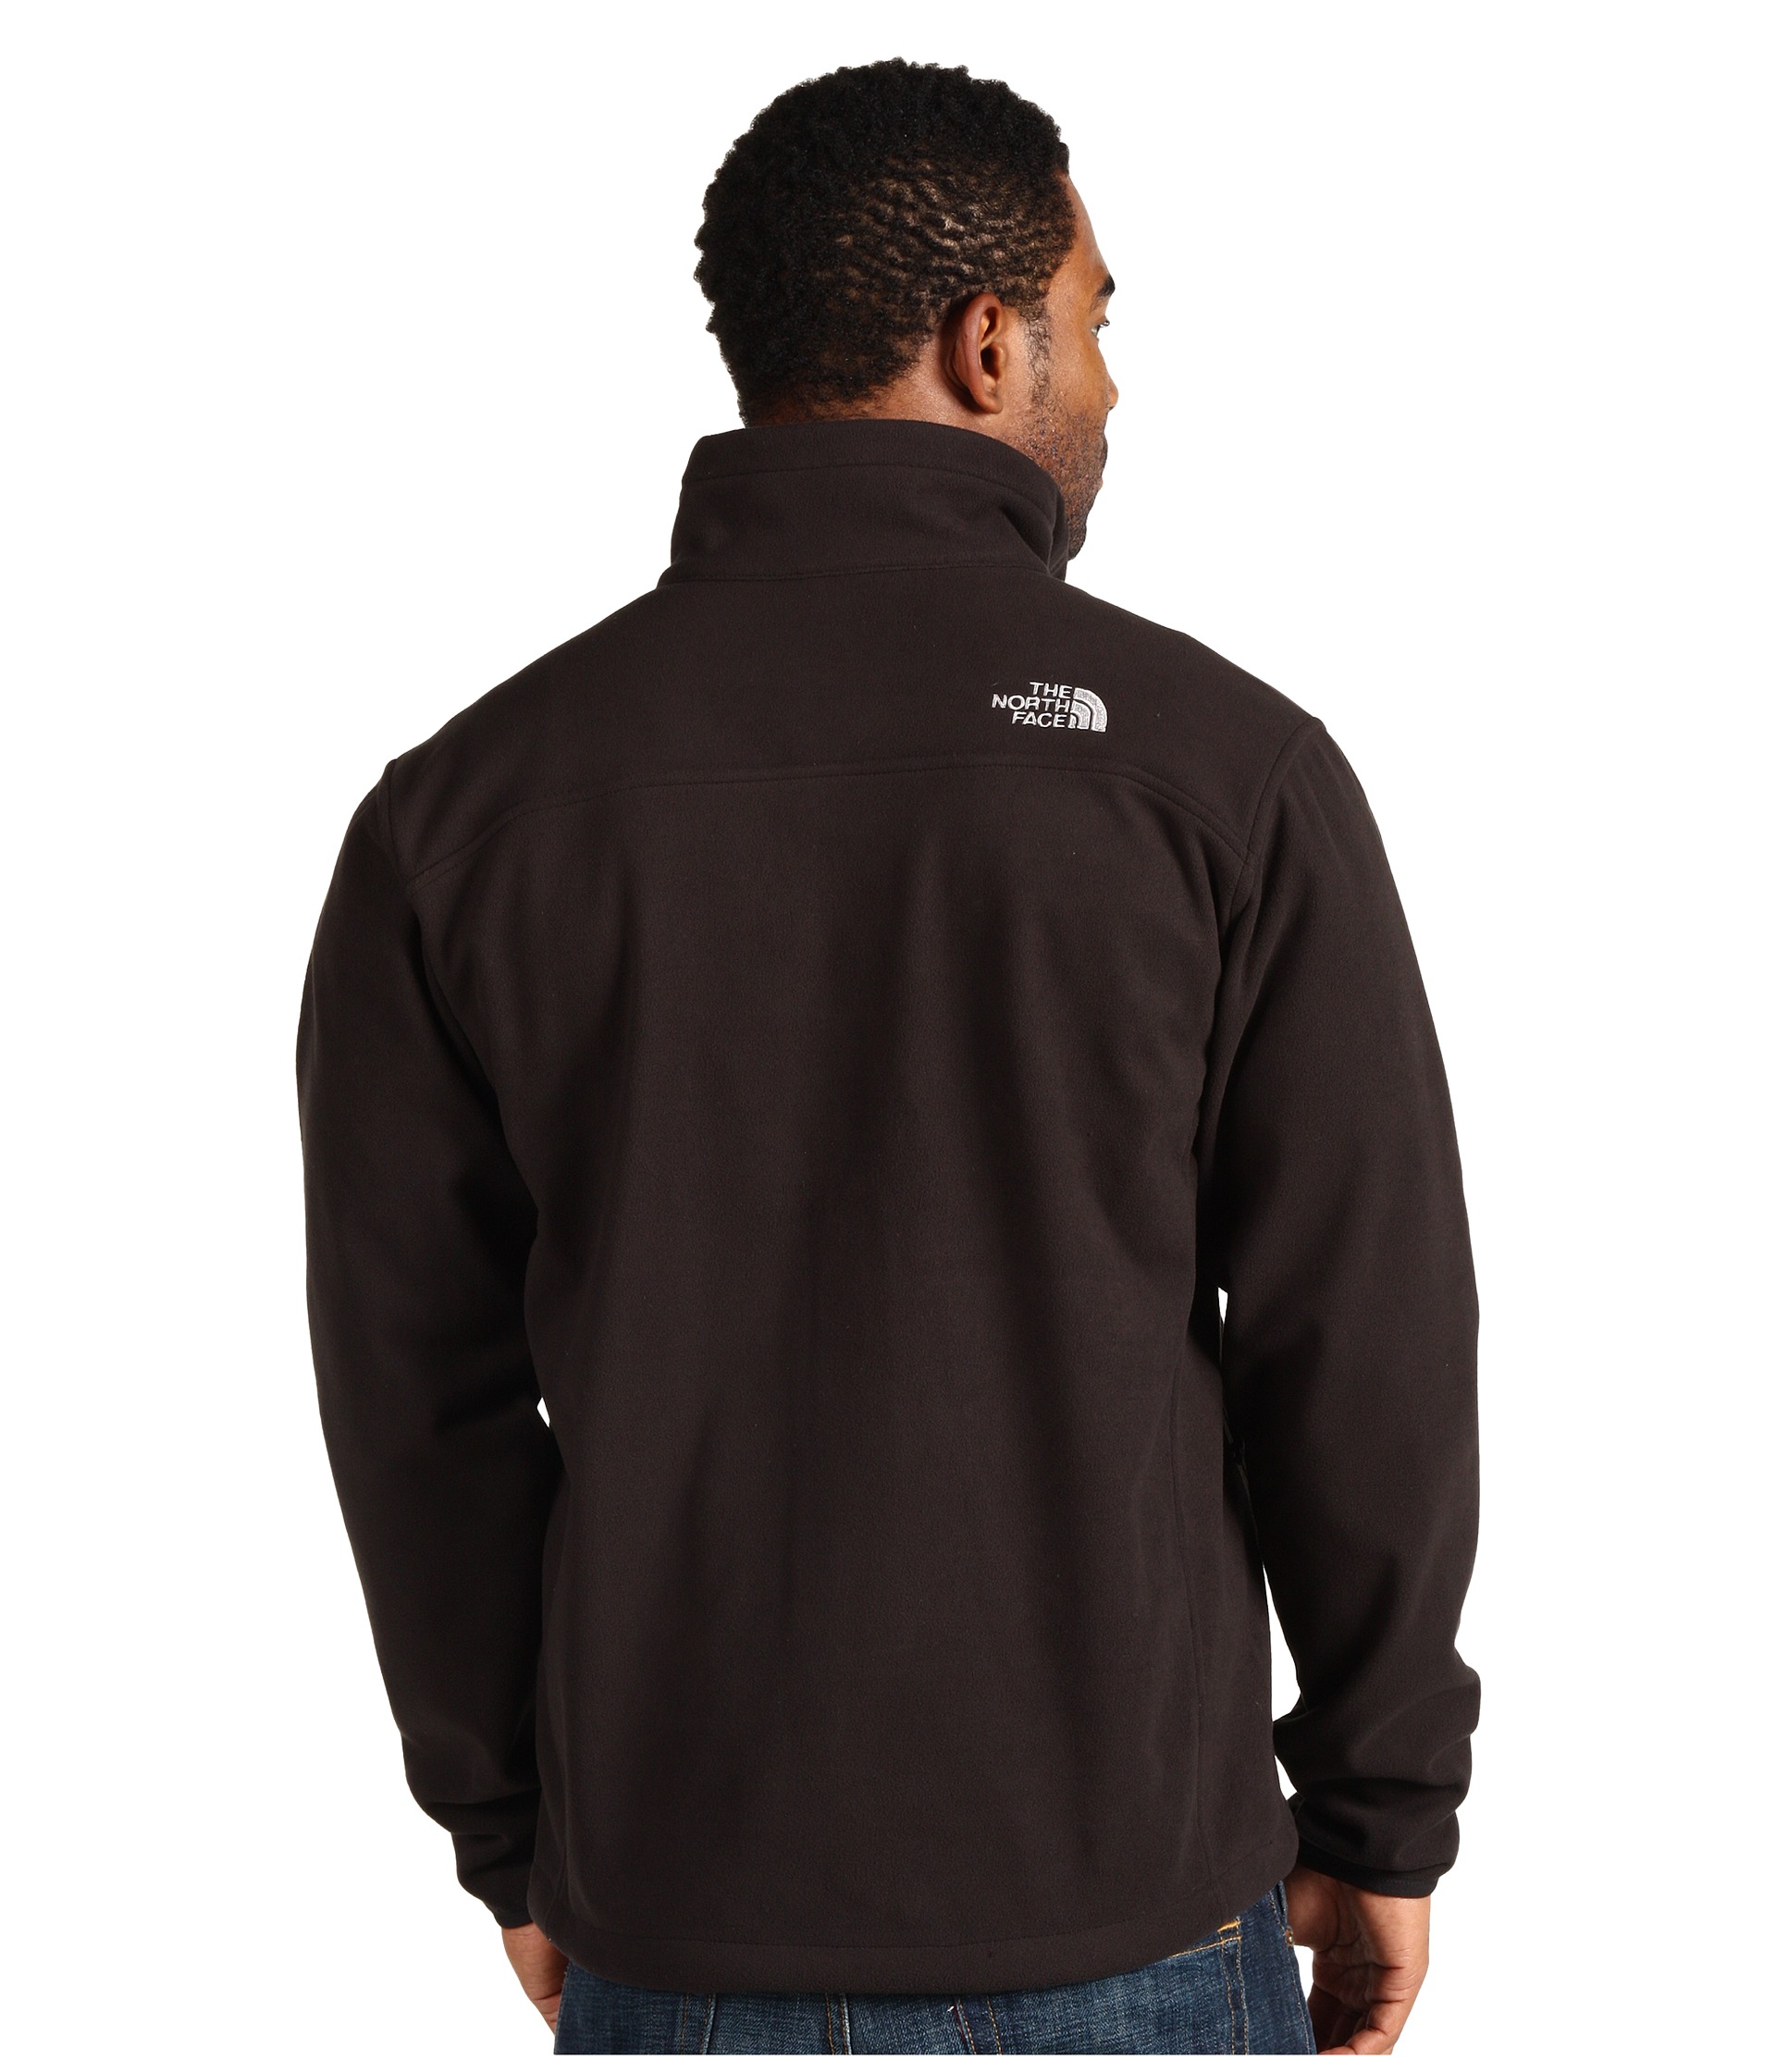 The North Face Windwall 1 Jacket | Shipped Free at Zappos